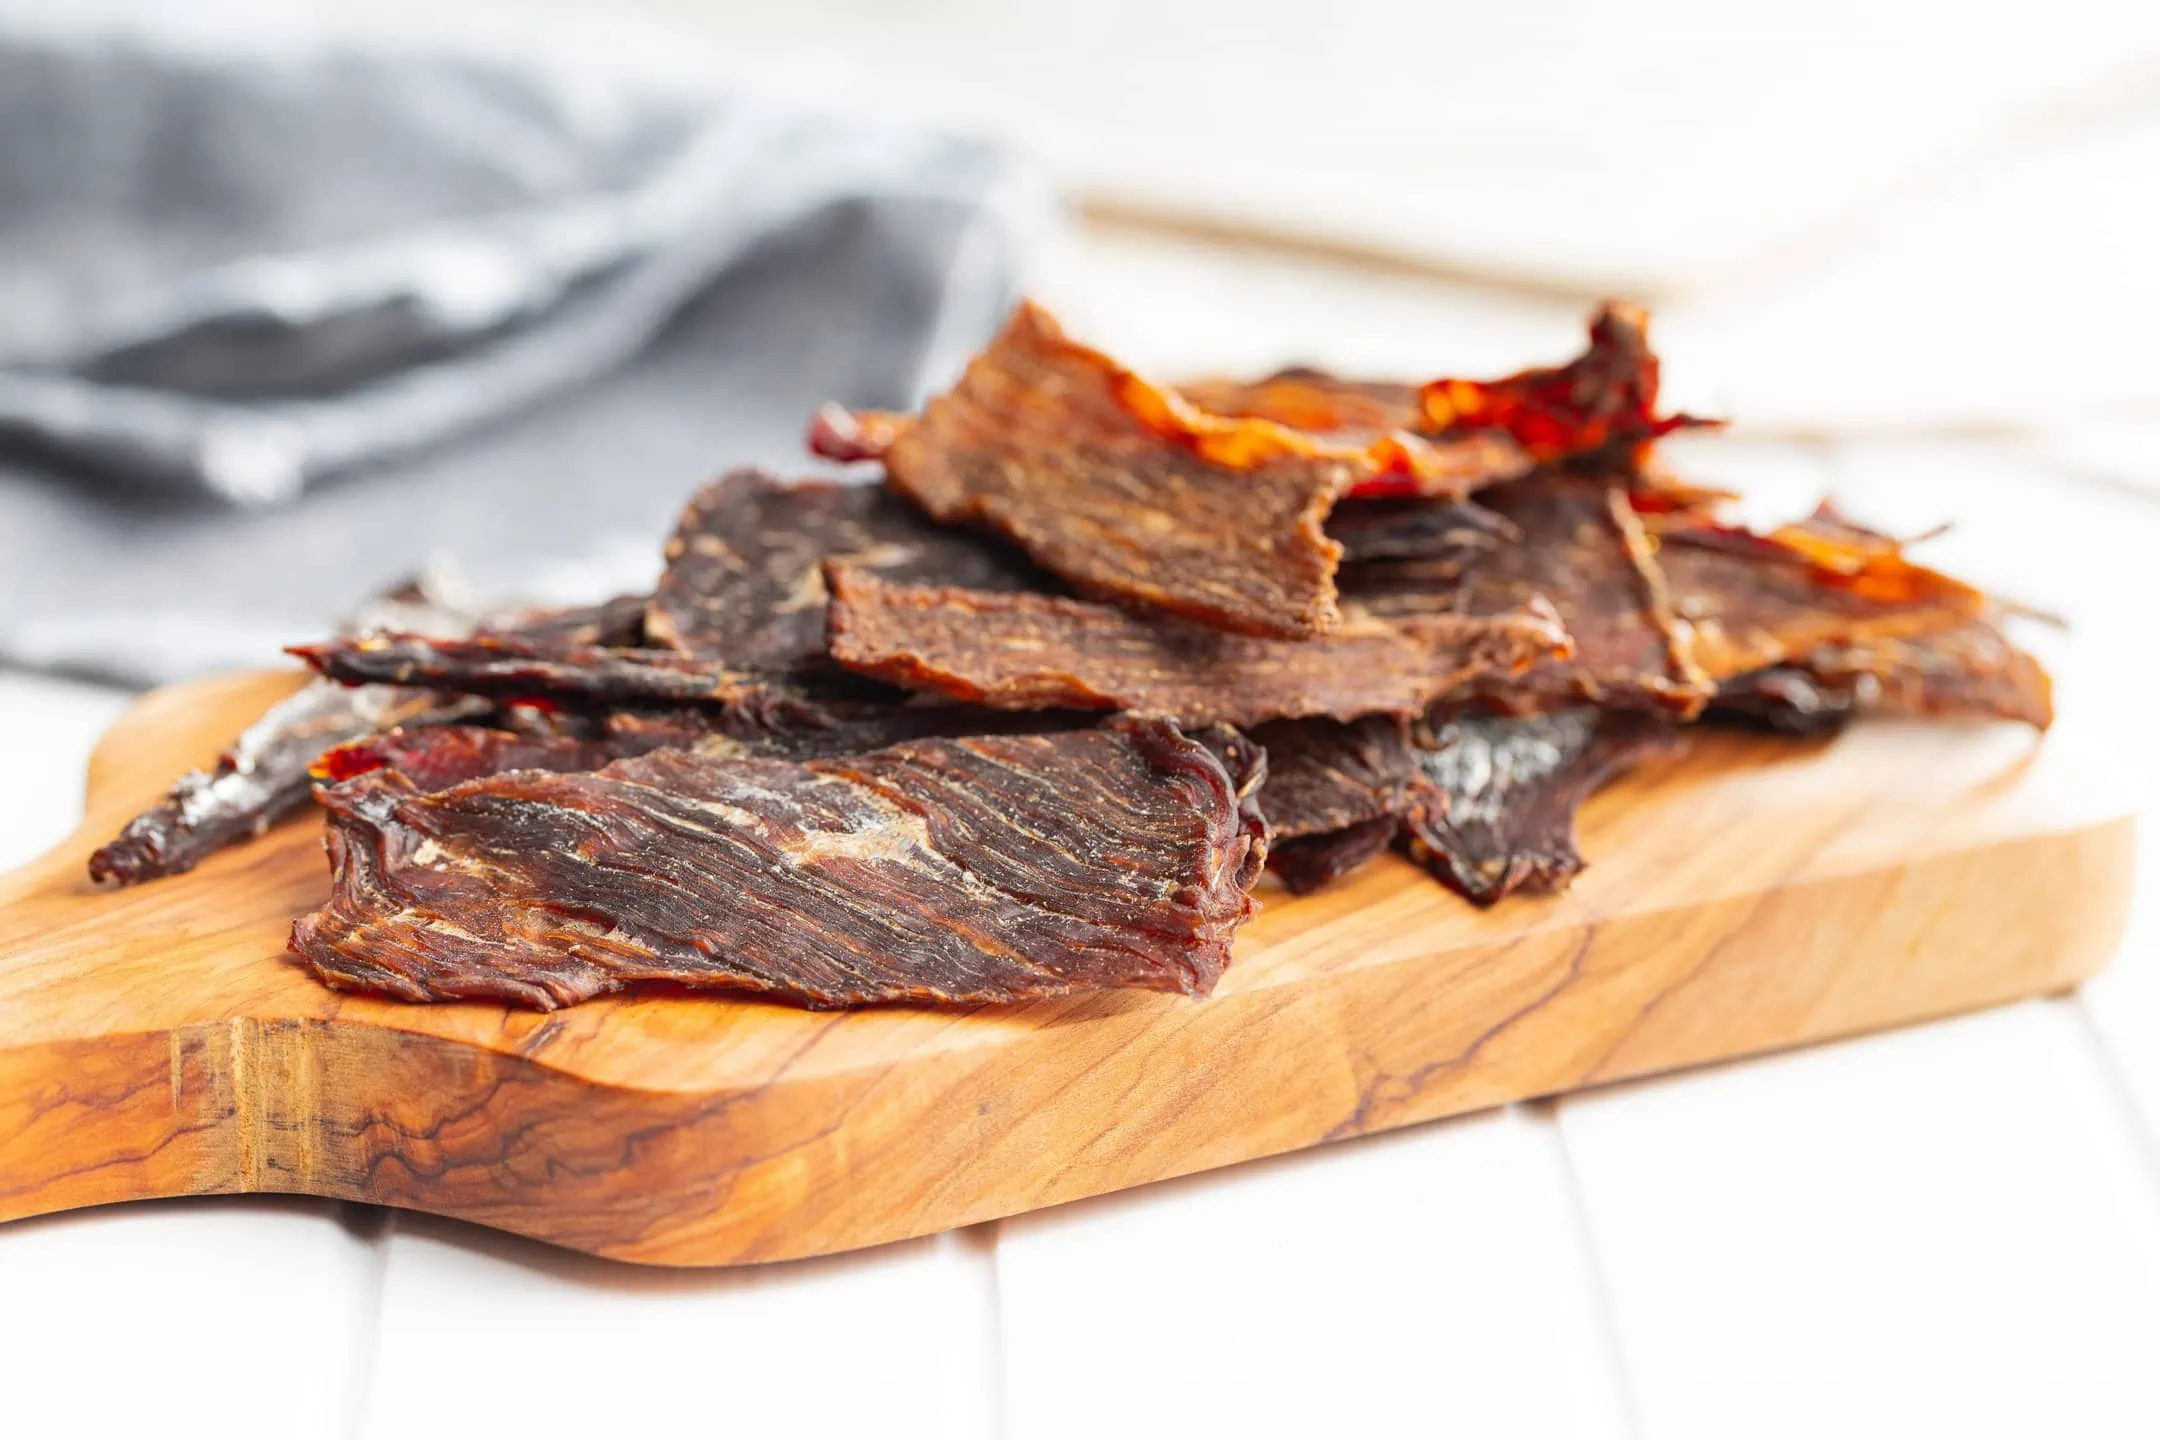 Ground deer jerky recipe slices on a cutting board